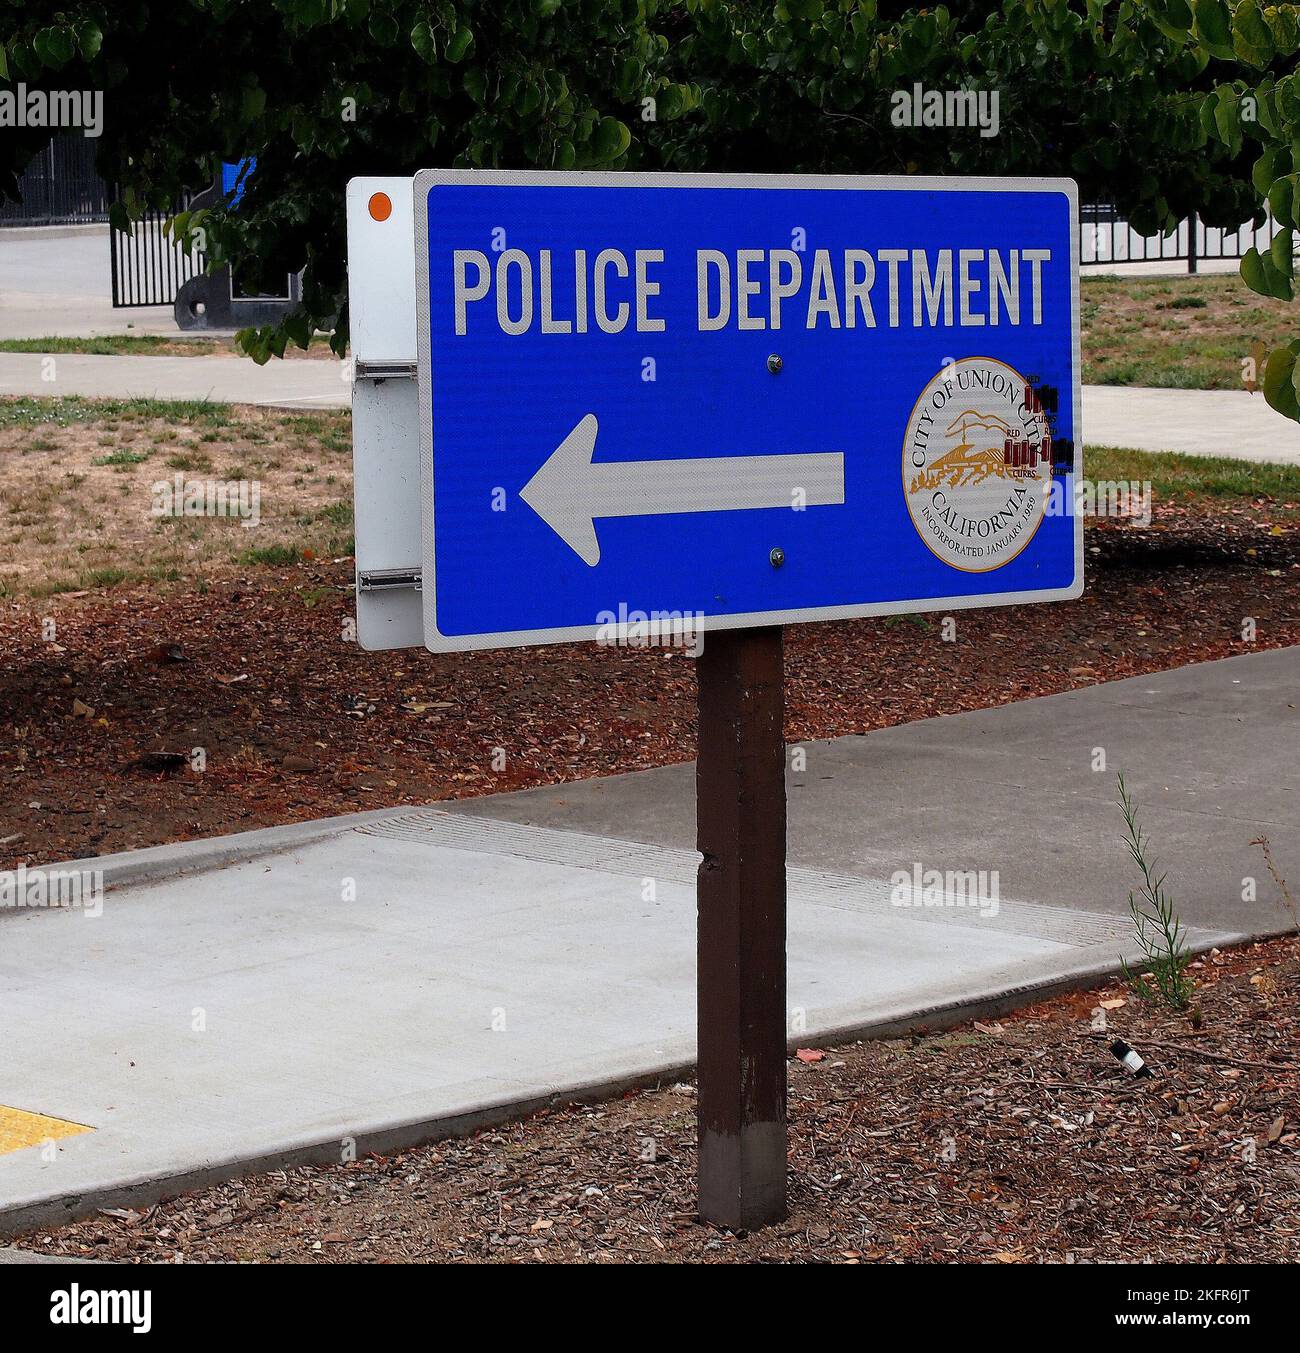 Police department direction arrow sign in Union City, California, Stock Photo